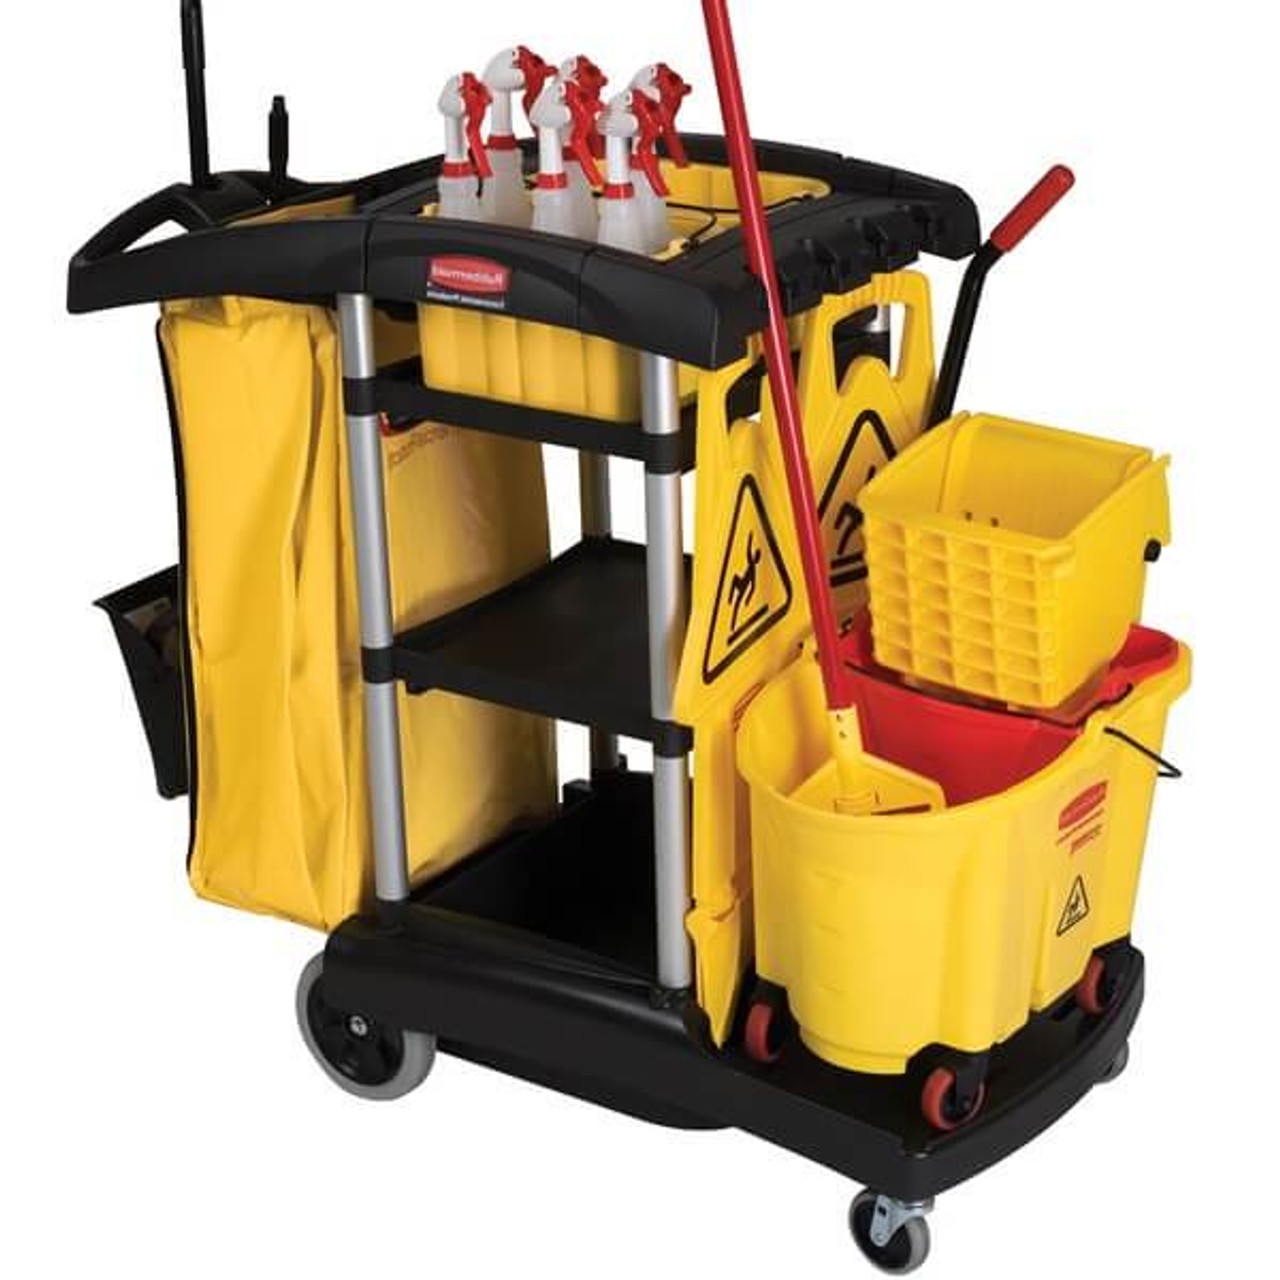 Rubbermaid High Capacity Janitor Cart - Streamlined Cleaning and Organization- Chicken Pieces